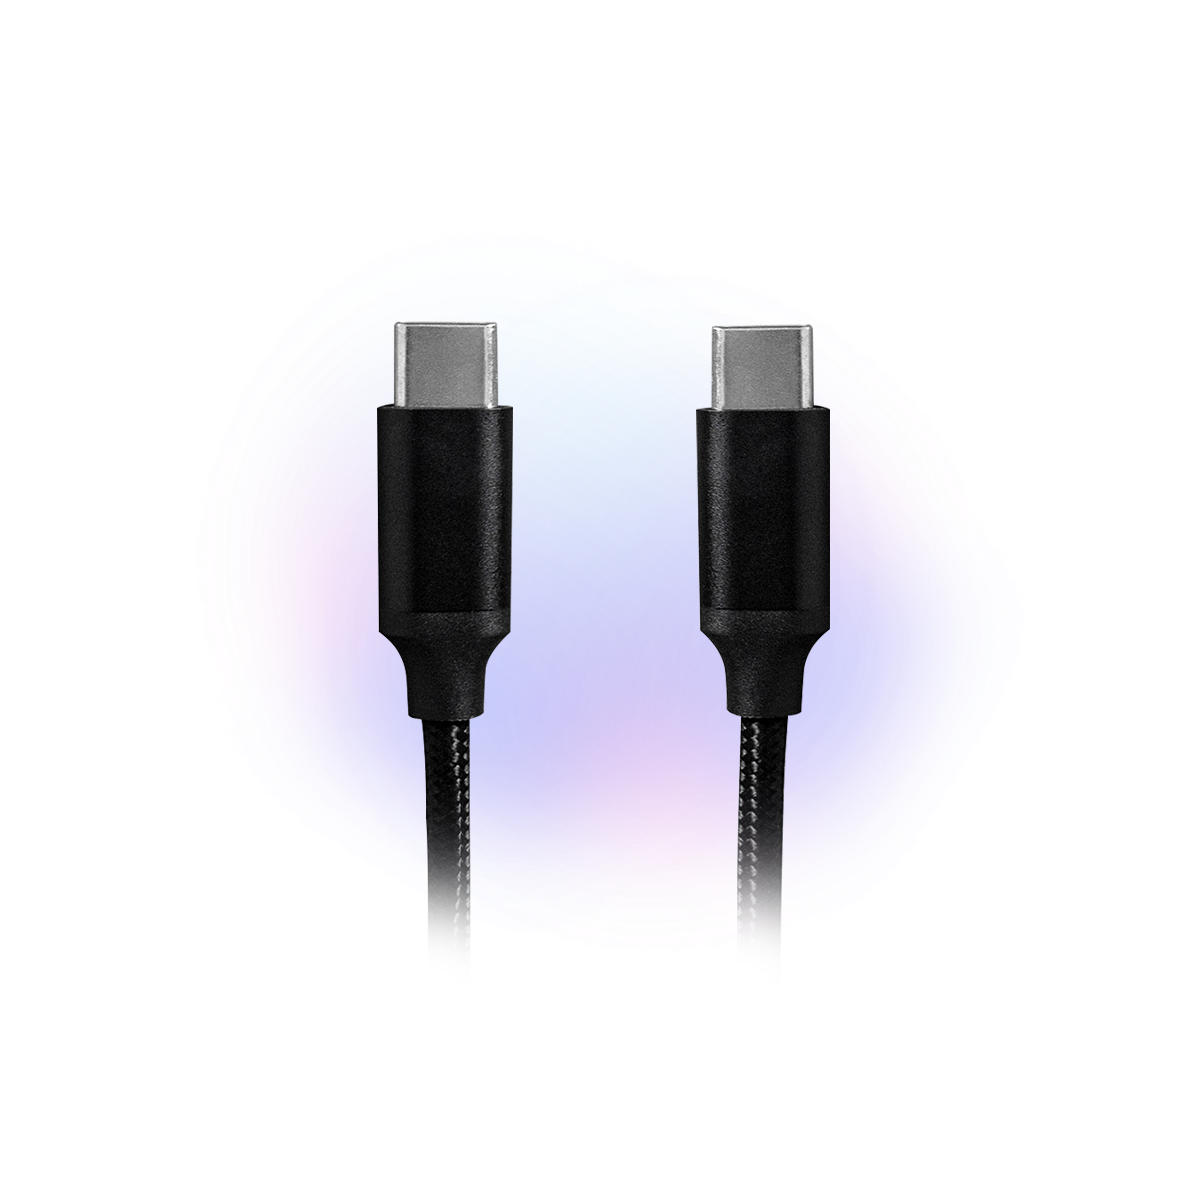 USB Type a Cables